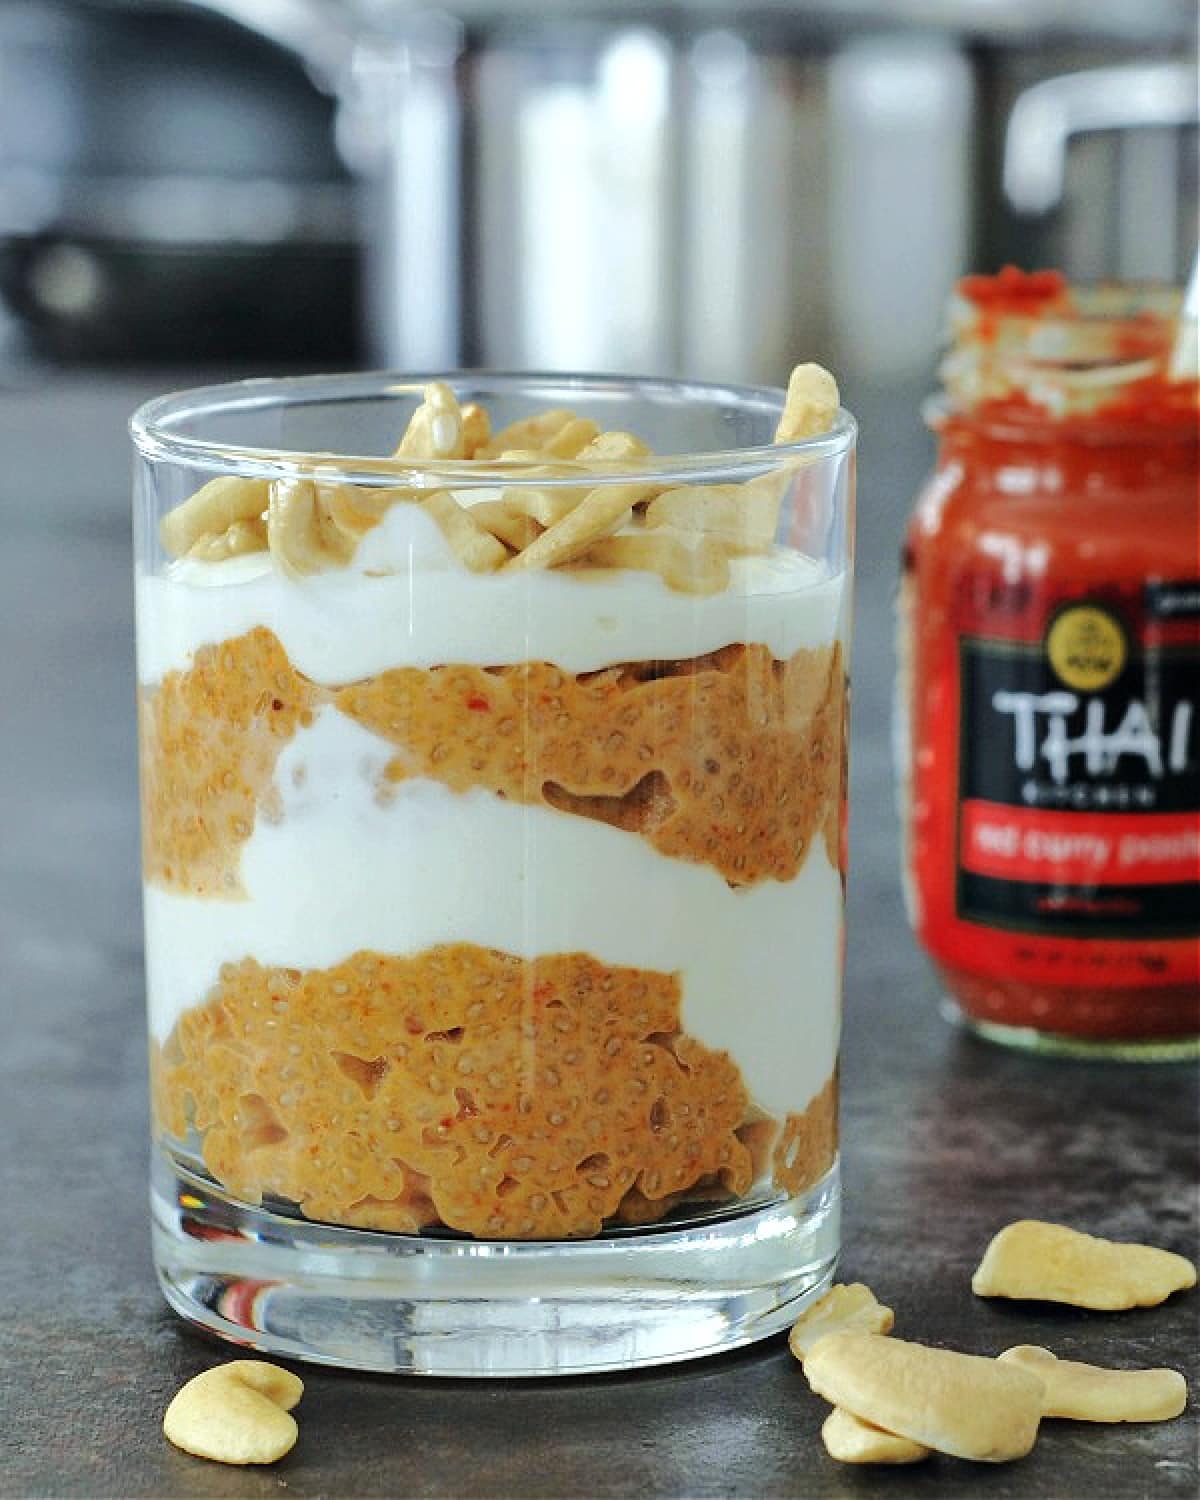 Red curry coconut chia pudding and cashew cream layered in a glass, red curry paste jar in background.